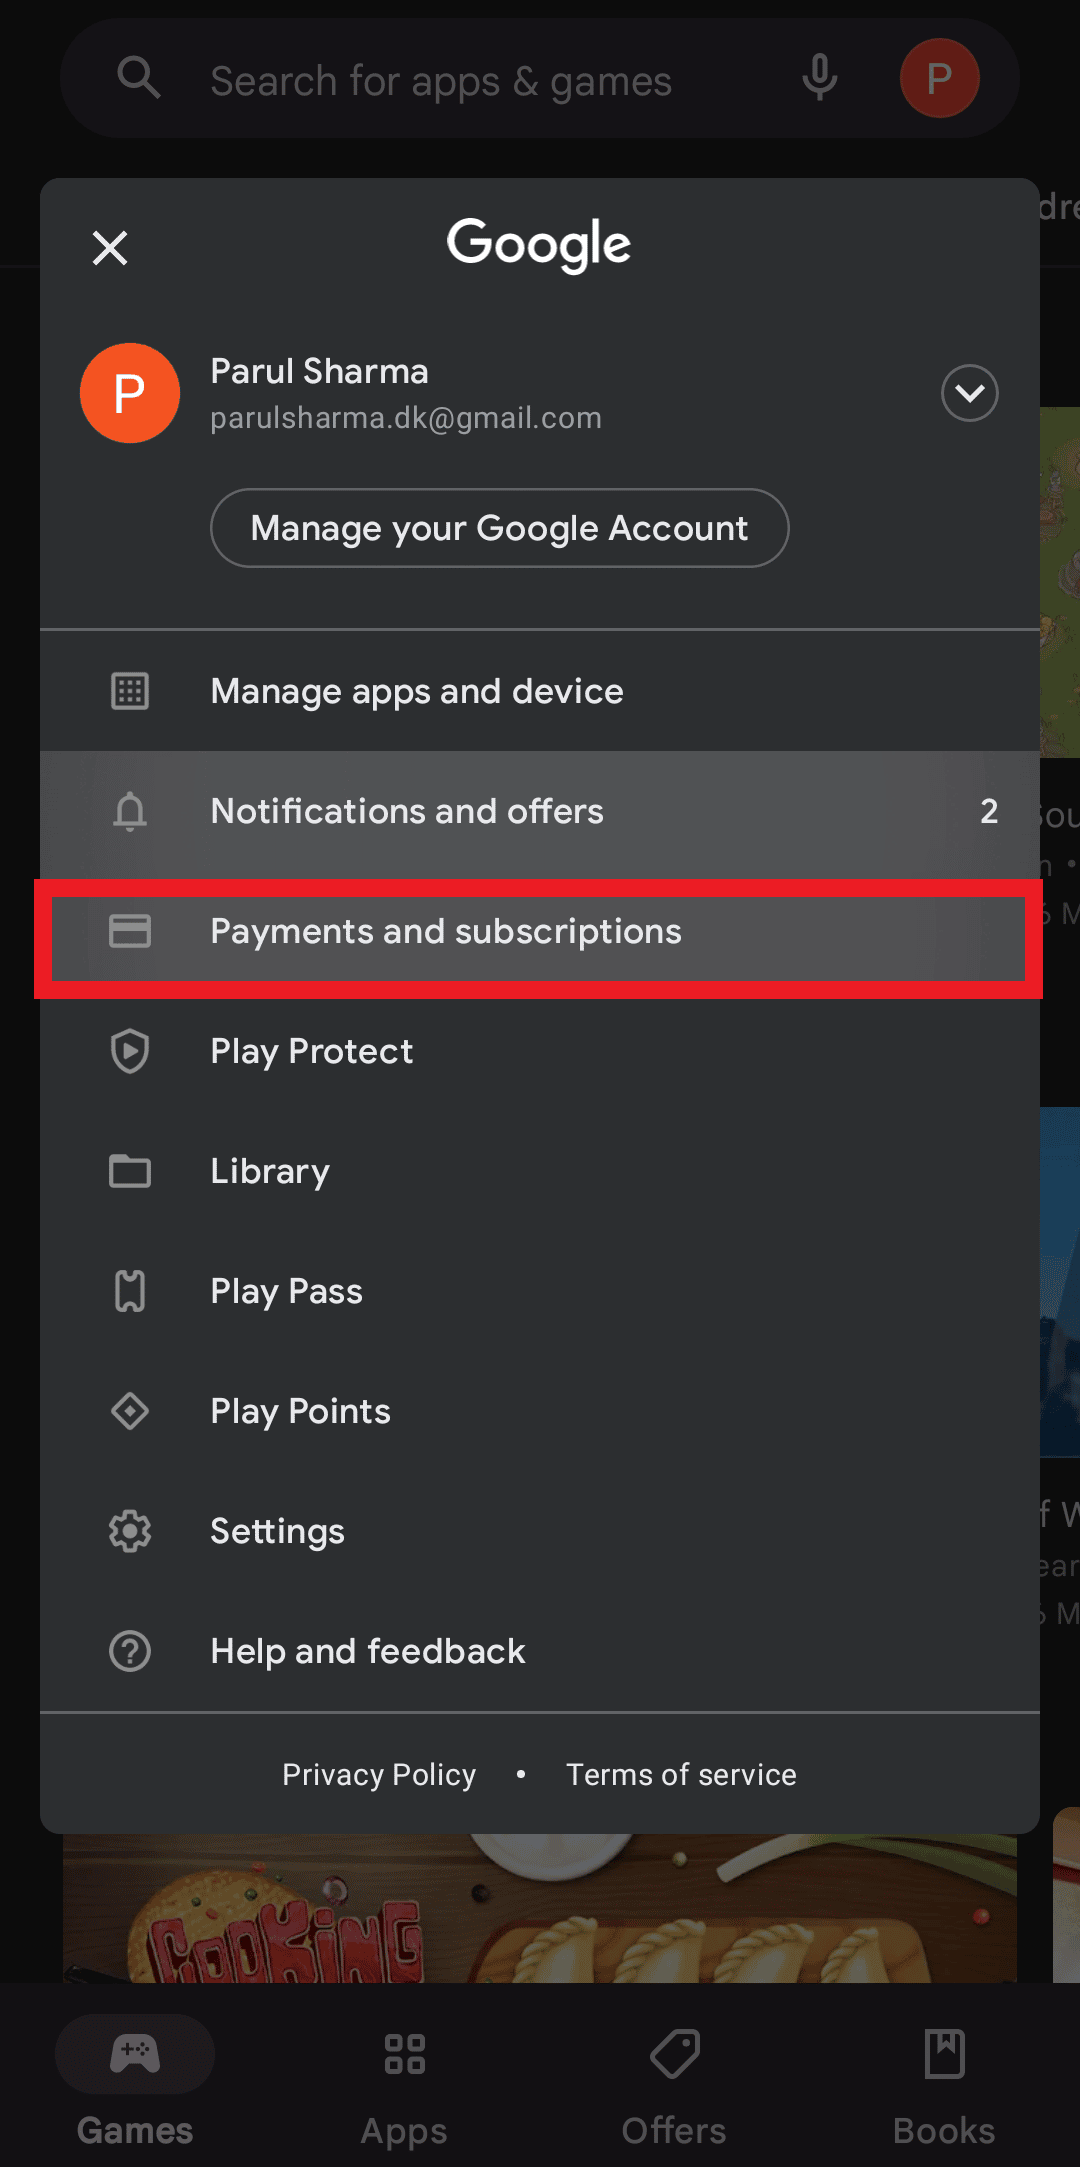 go to payments and subscriptions